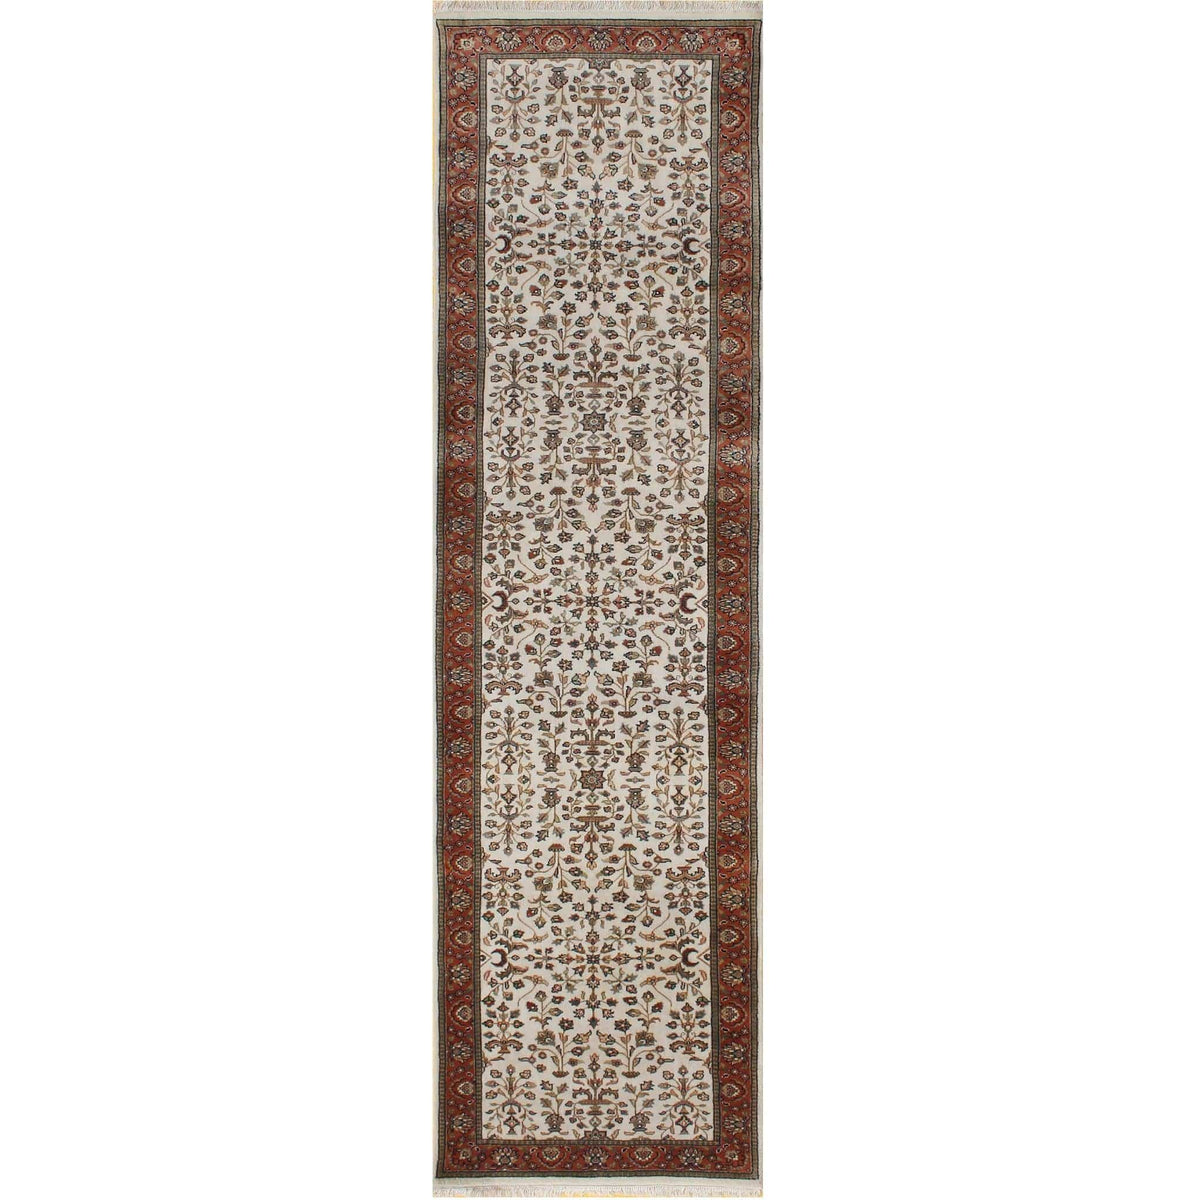 Fine Hand-knotted Wool Saruk Design Small Rug 74cm x 139cm